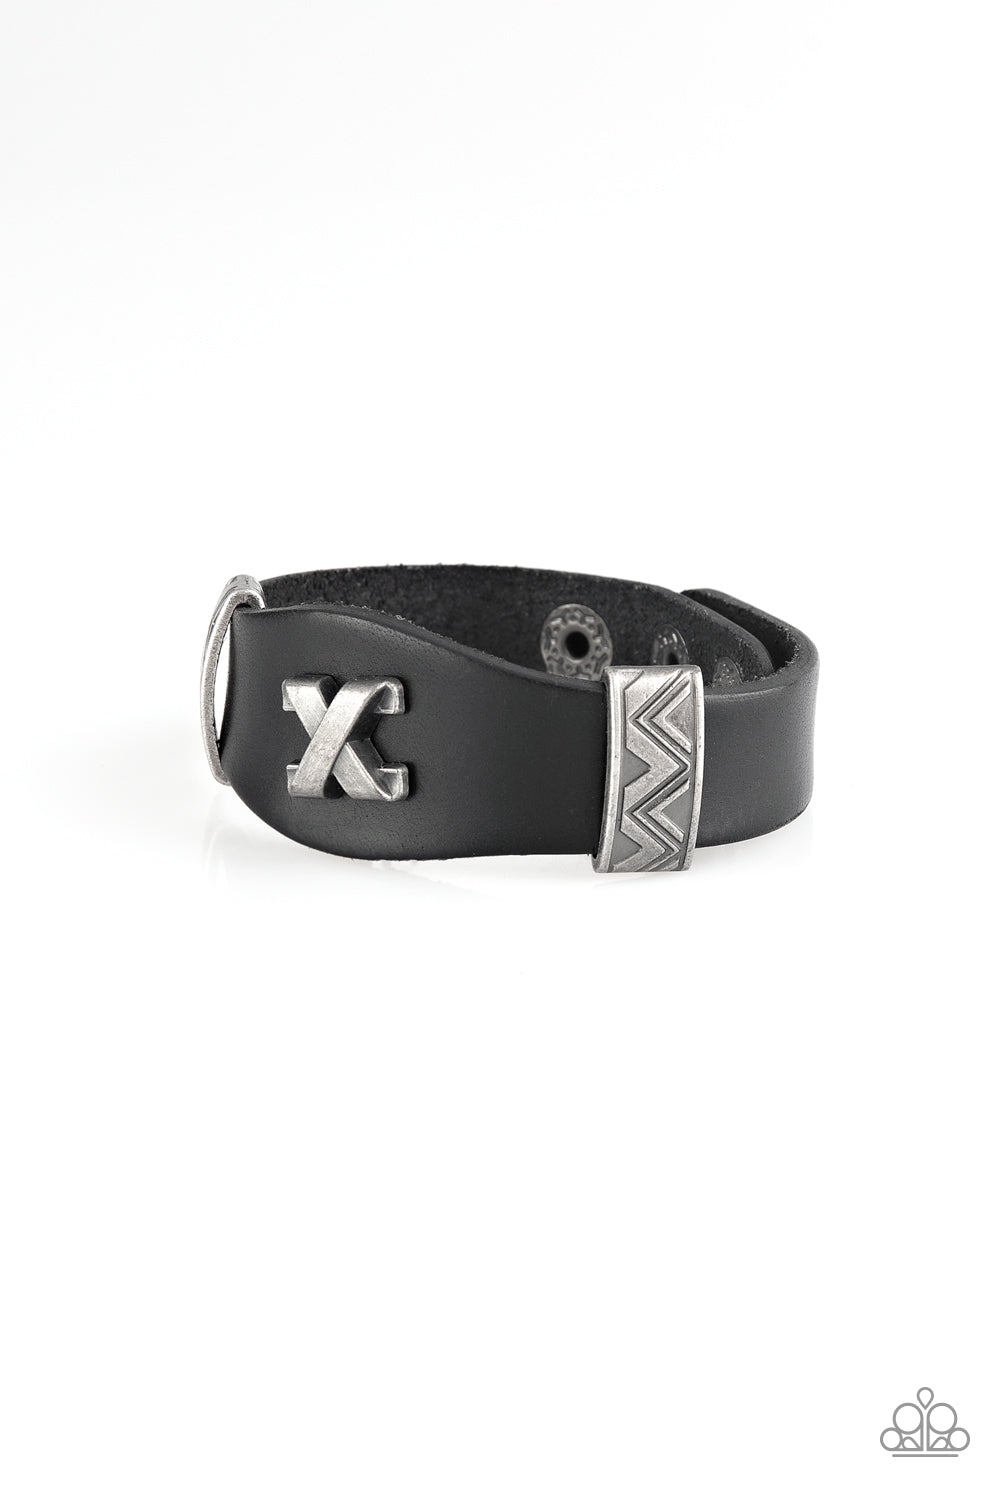 Featuring ornate metallic accents, an antiqued crisscross frame embellishes the center of a black leather band for an edgy urban look. Features an adjustable snap closure.